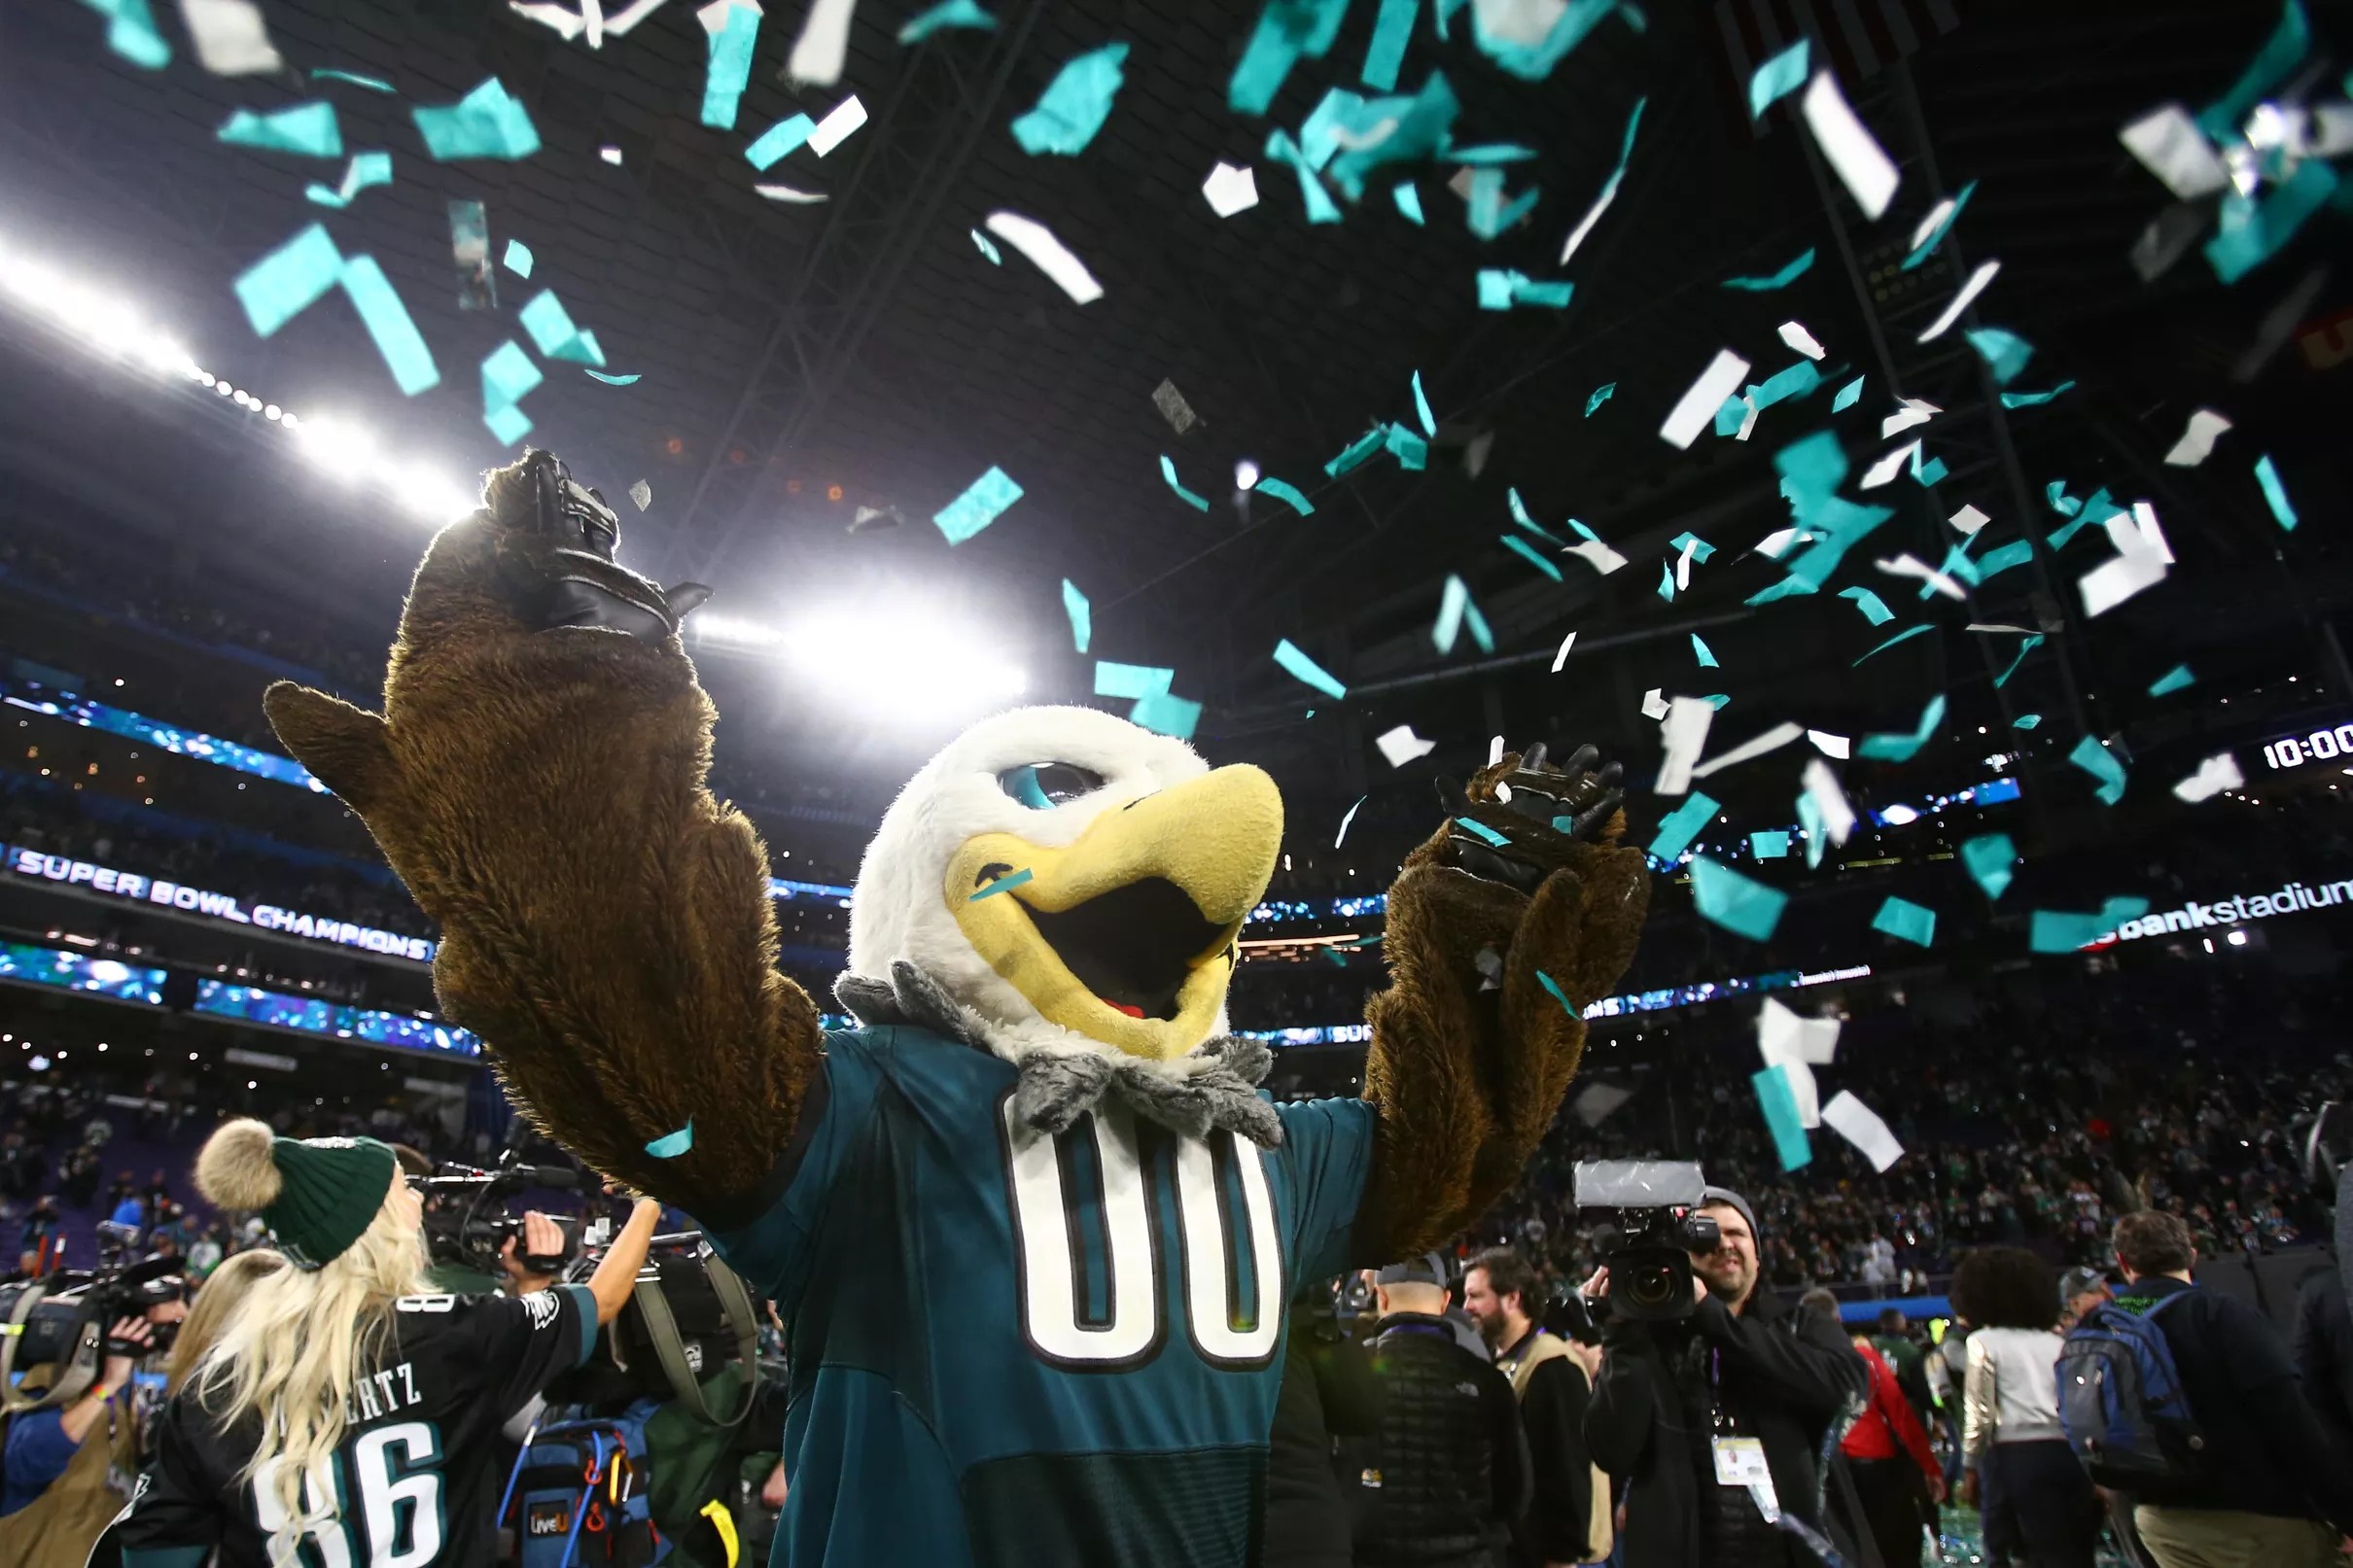 Get the unofficial guide to the Eagles’ Super Bowl season!